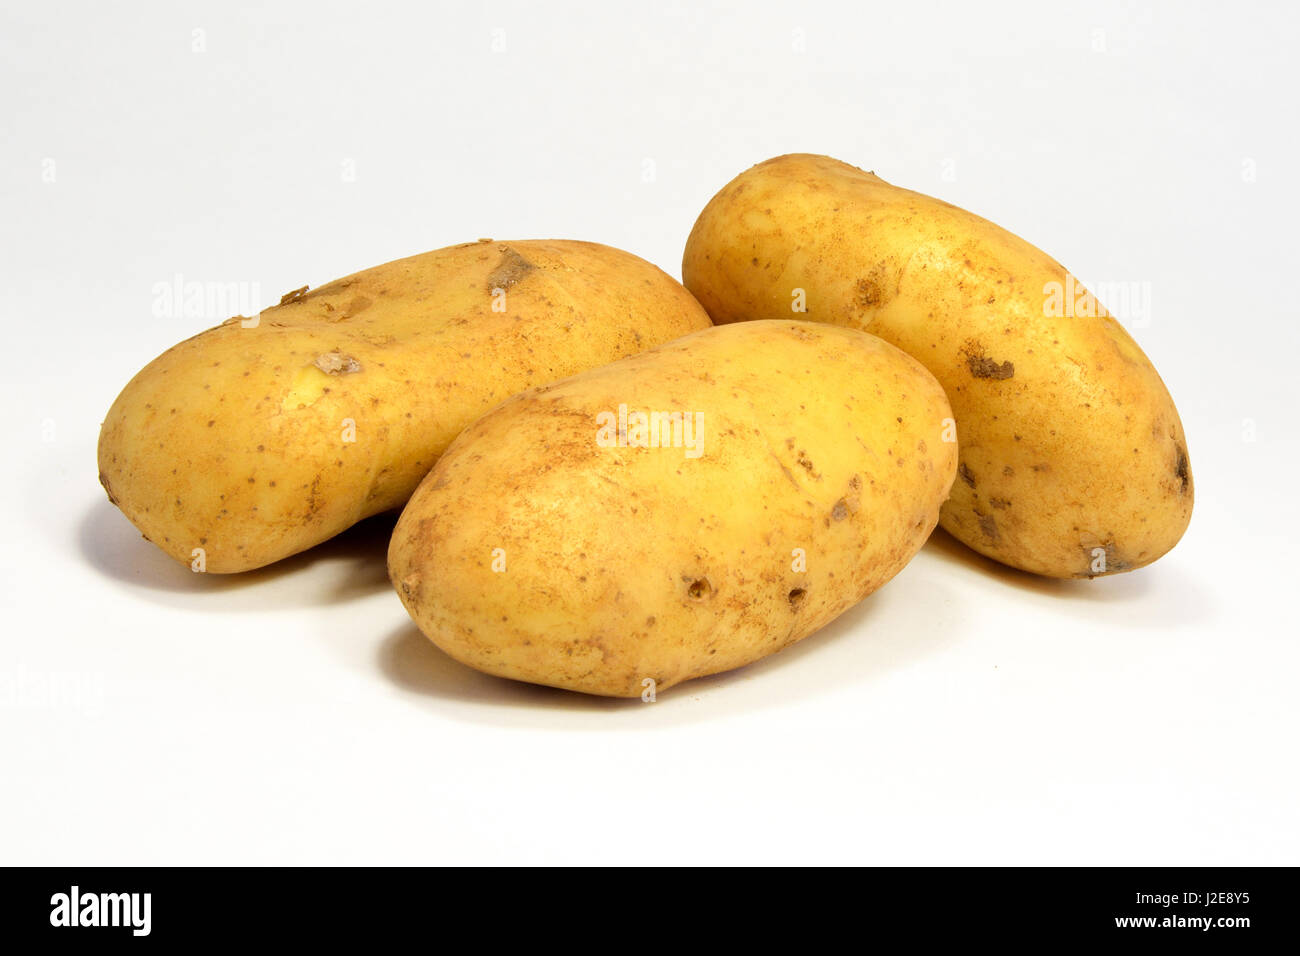 Fresh potatoes, healthy vegetarian source of carbohydrate Stock Photo